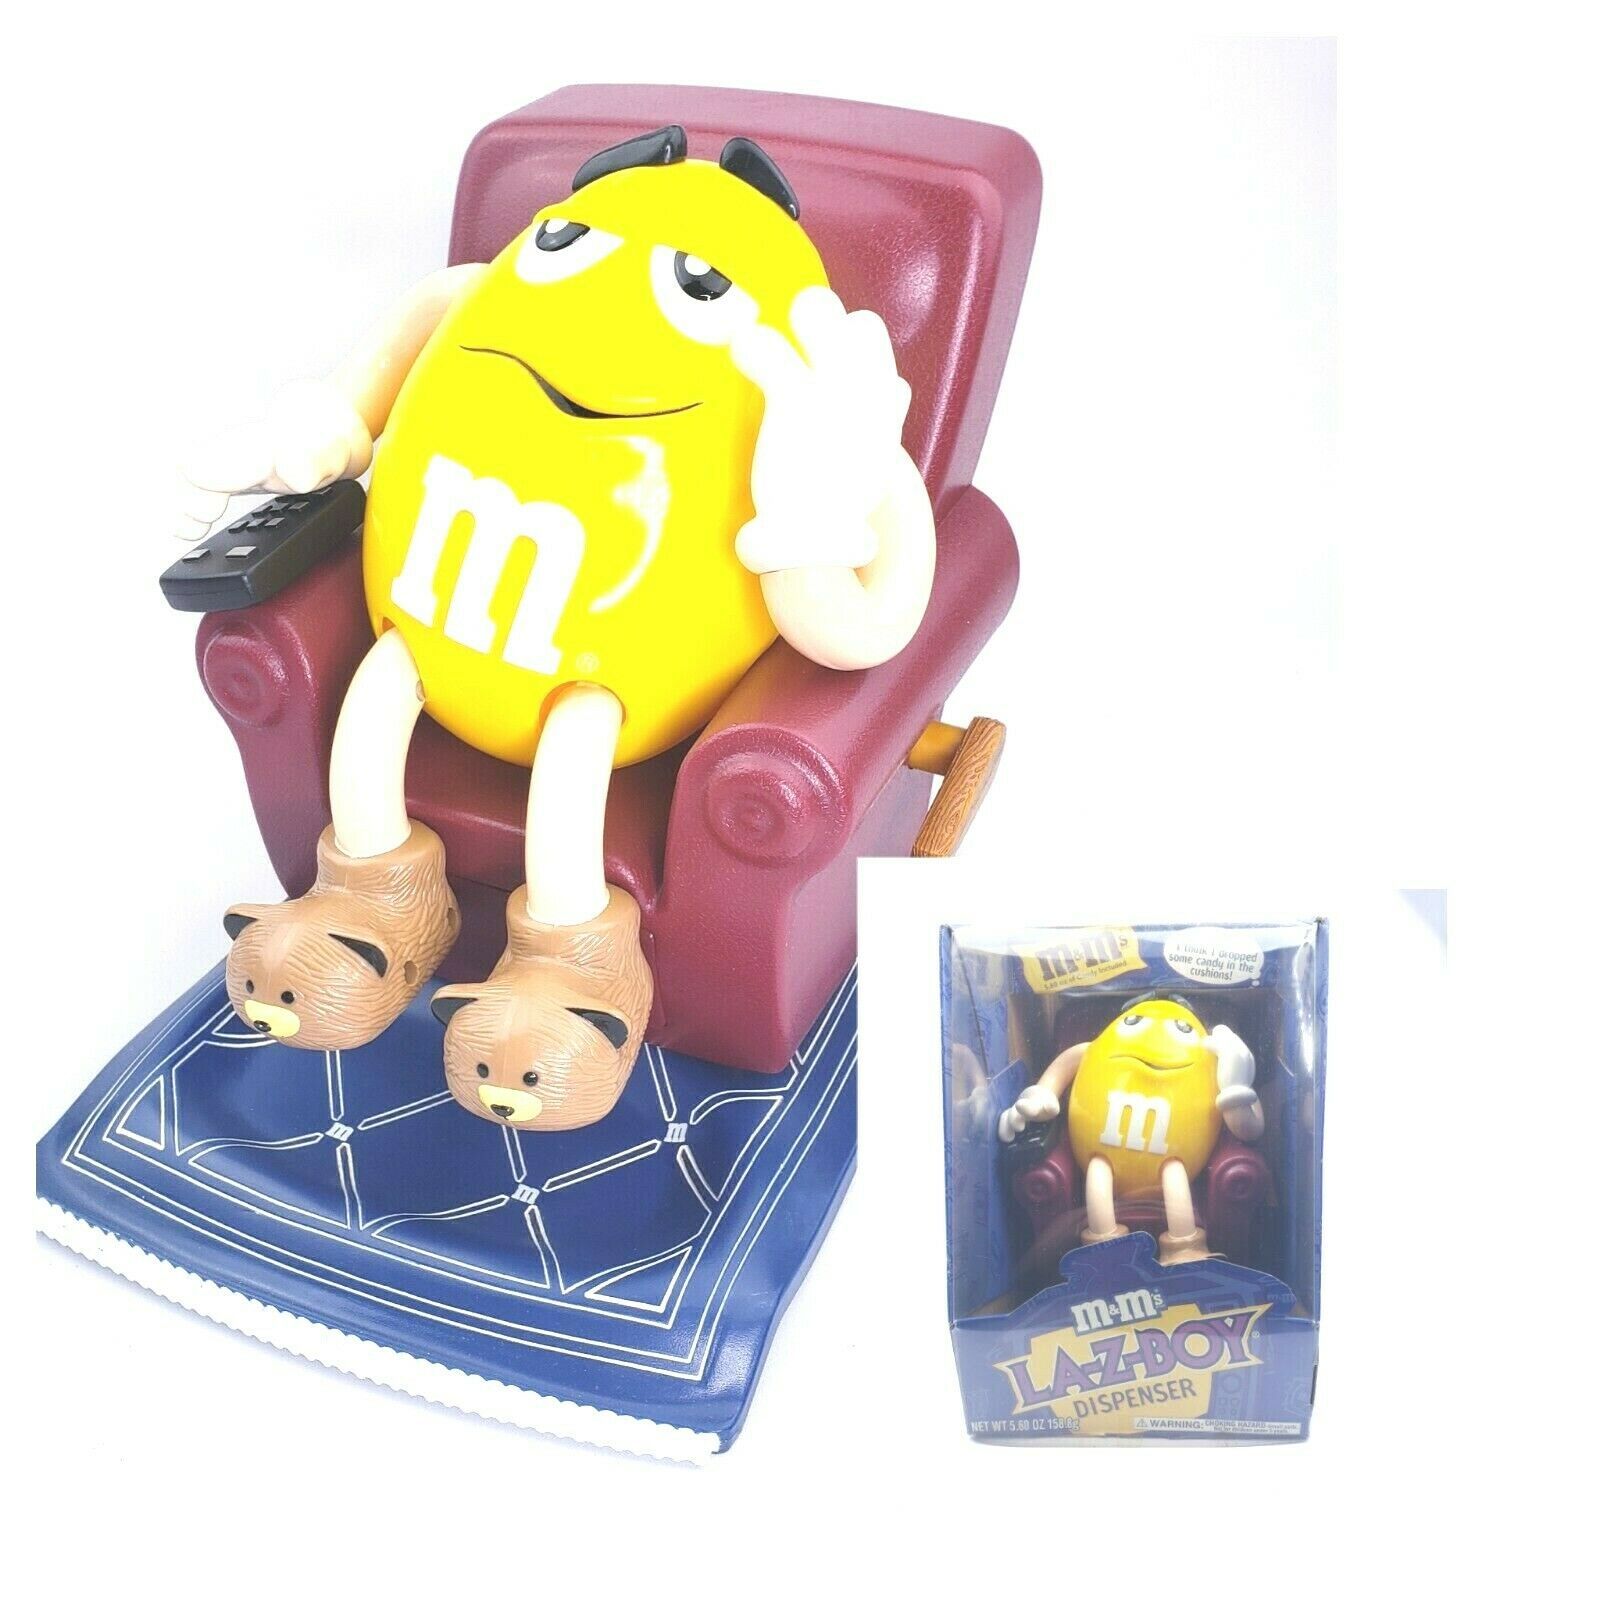 Yellow Peanut M&M's Character Candy Dispenser Sitting On Recliner Chair